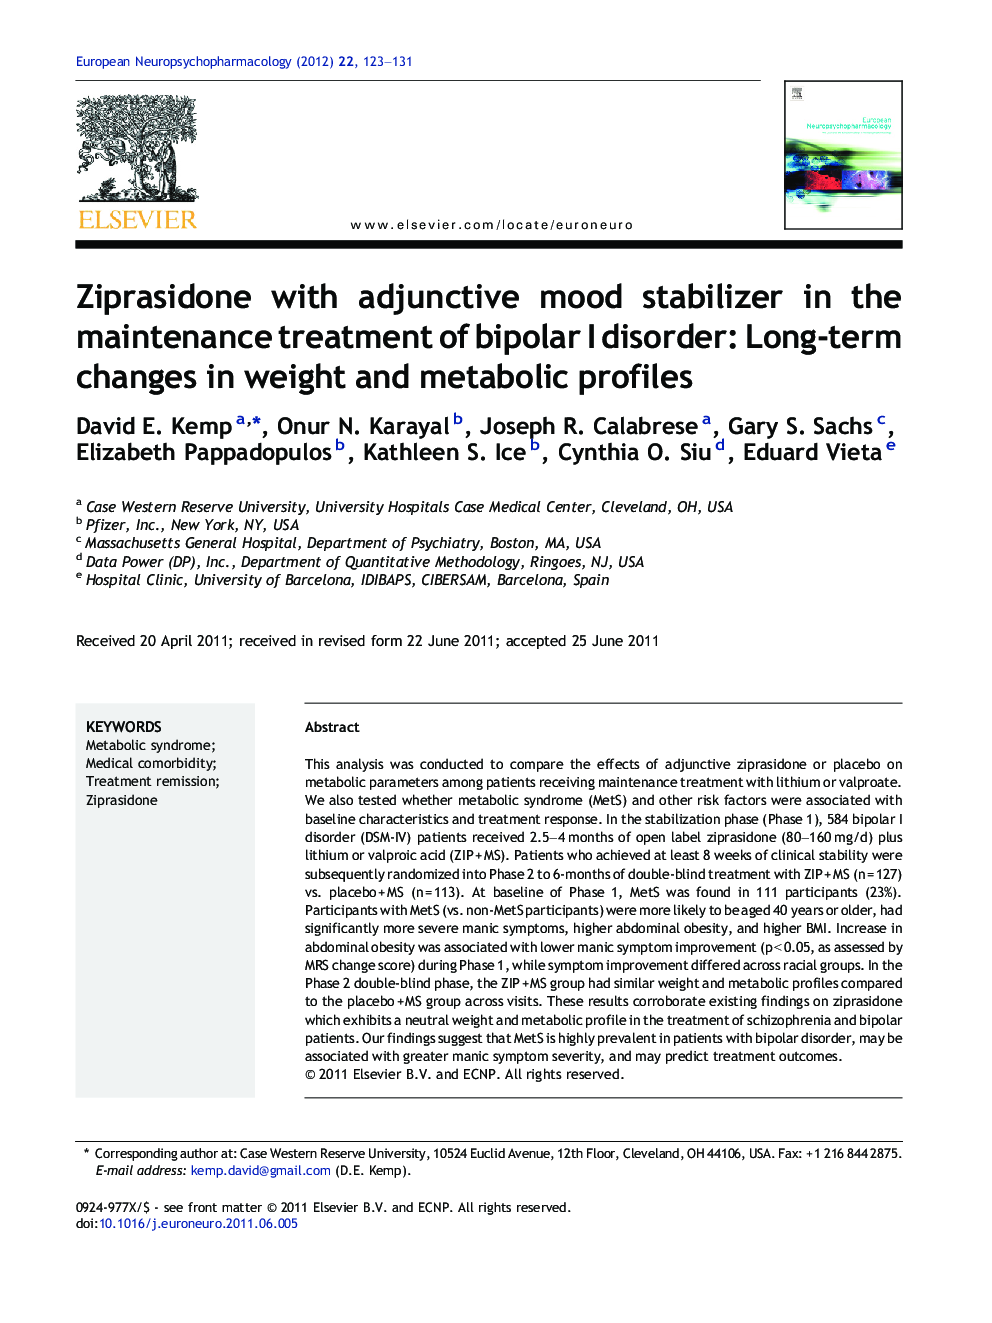 Ziprasidone with adjunctive mood stabilizer in the maintenance treatment of bipolar I disorder: Long-term changes in weight and metabolic profiles